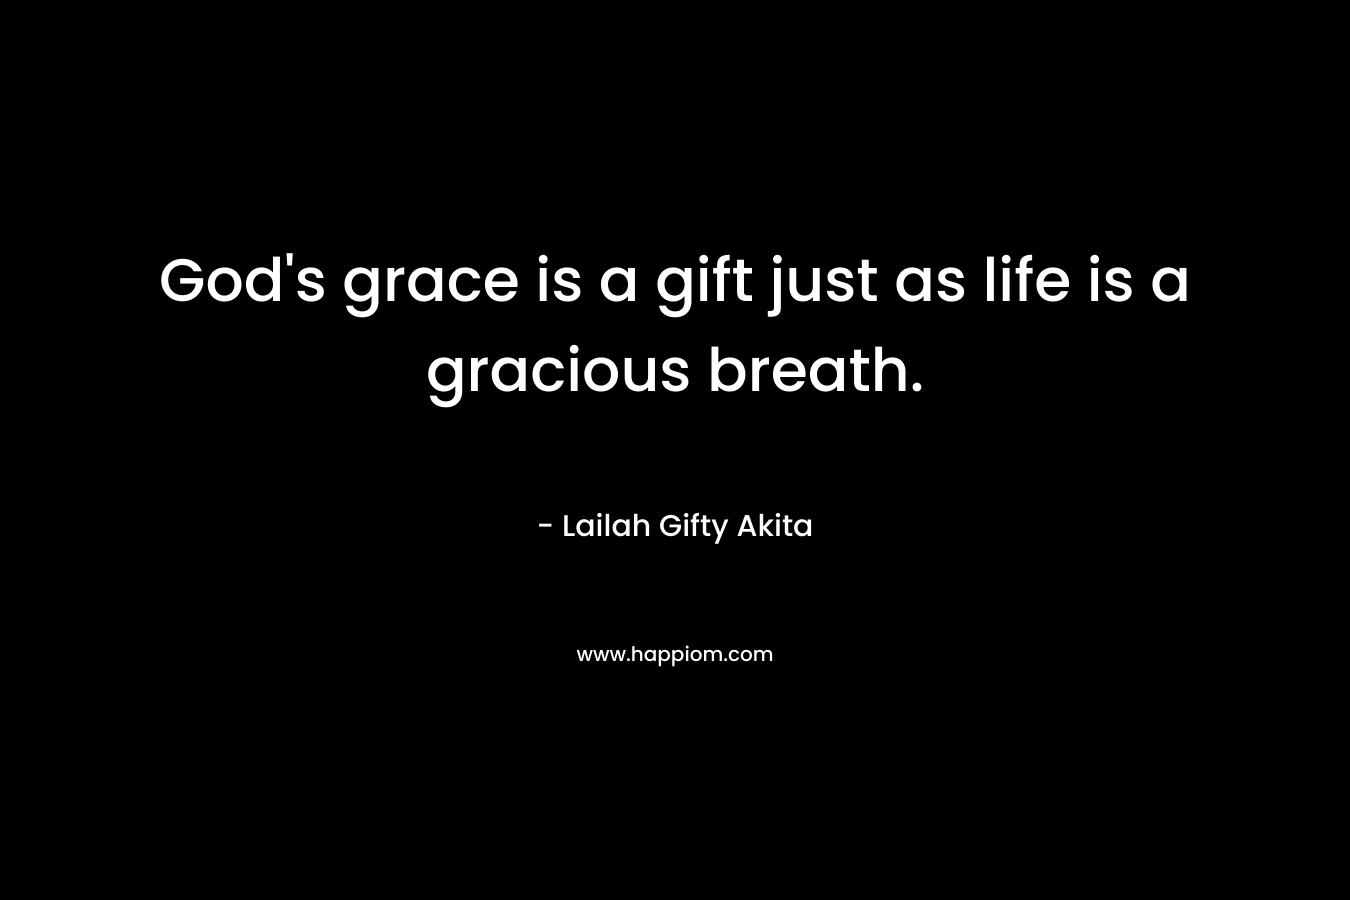 God's grace is a gift just as life is a gracious breath.